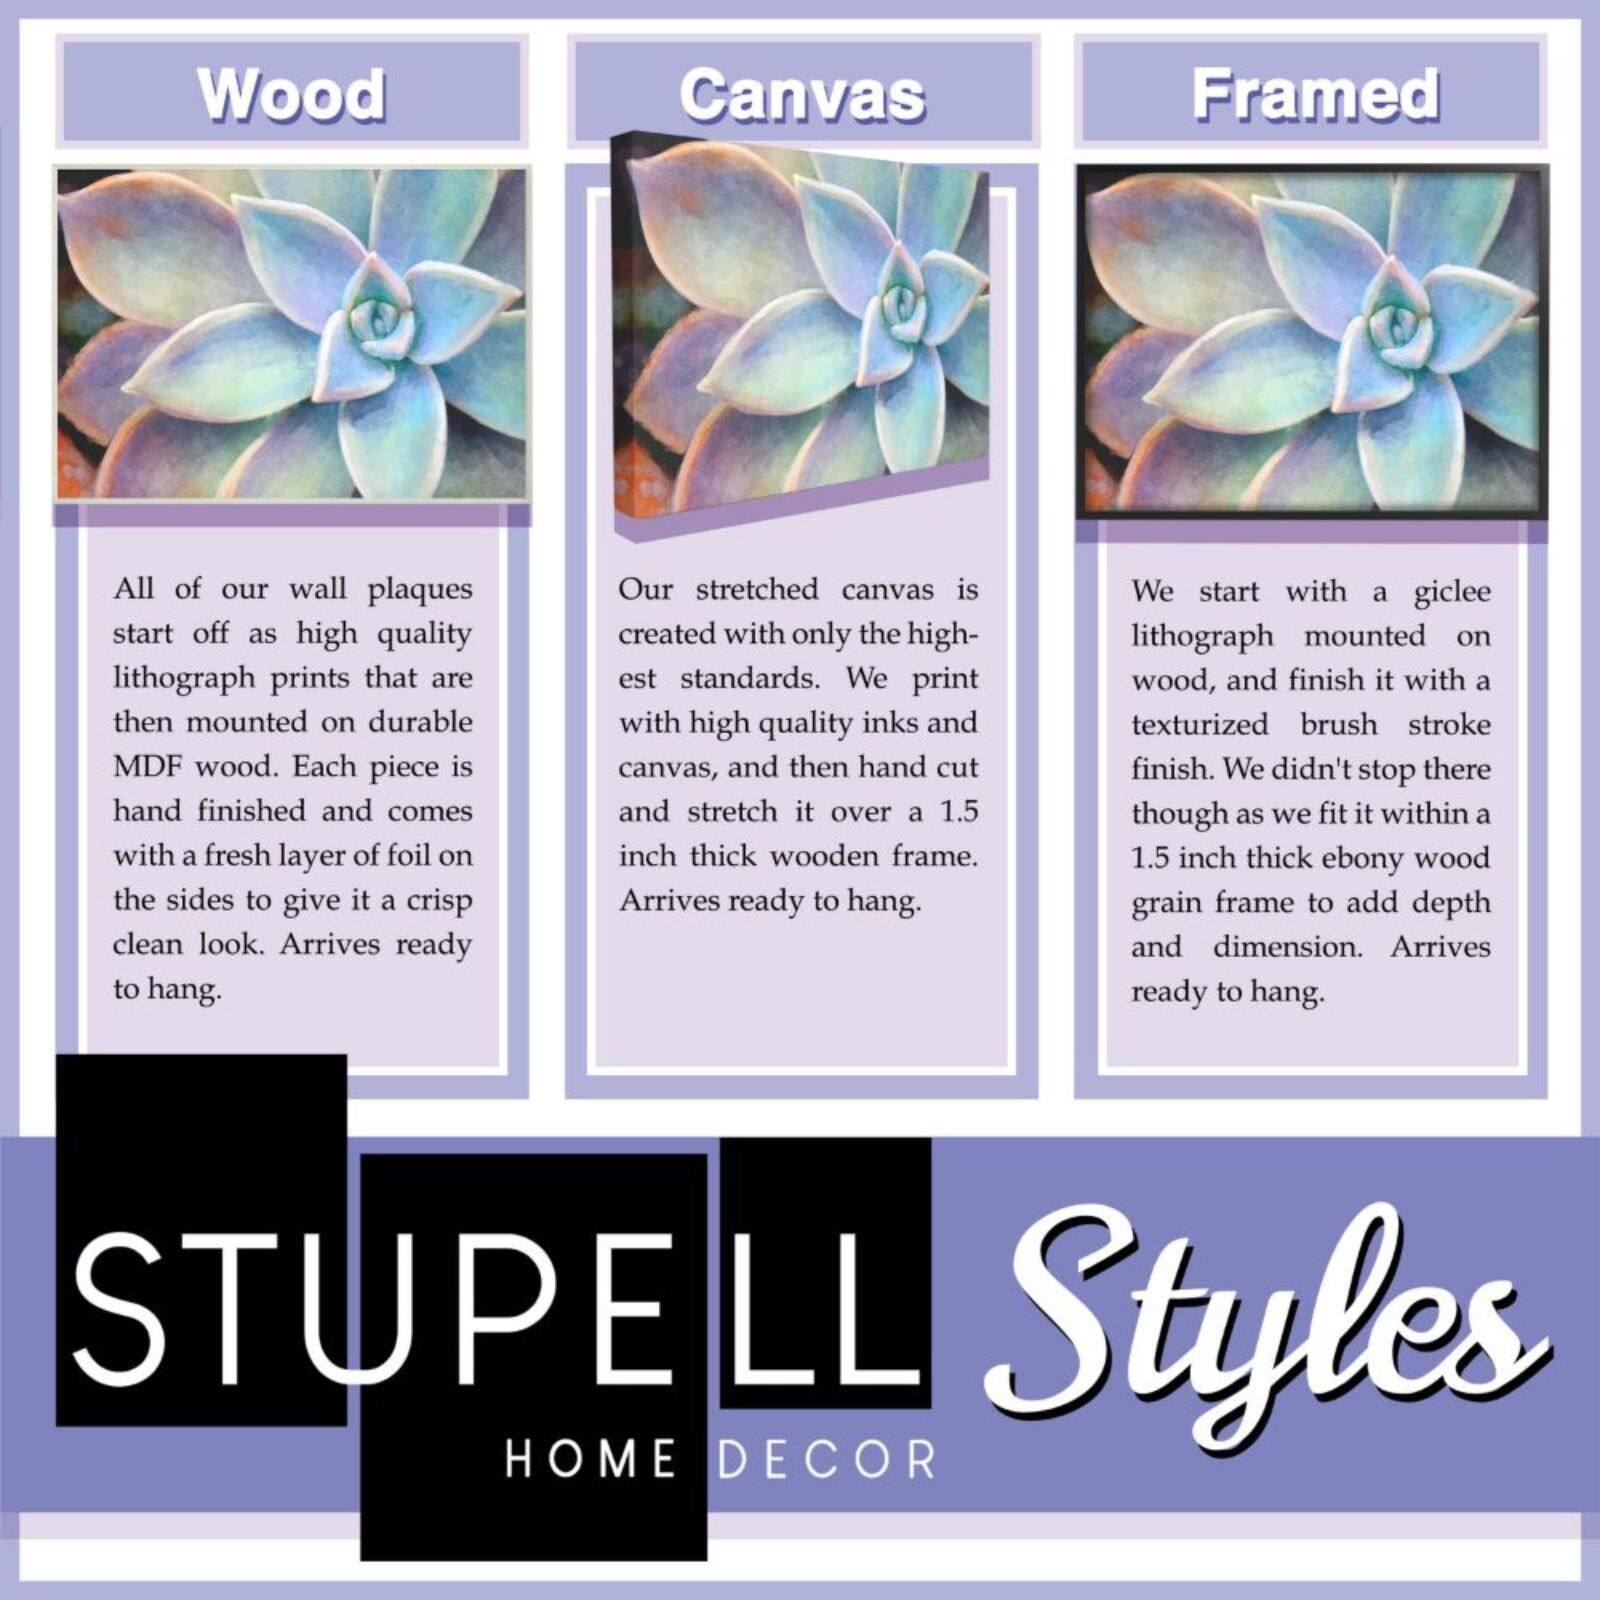 Stupell Industries Colorful Abstract Geometric Town Pattern Wall Accent